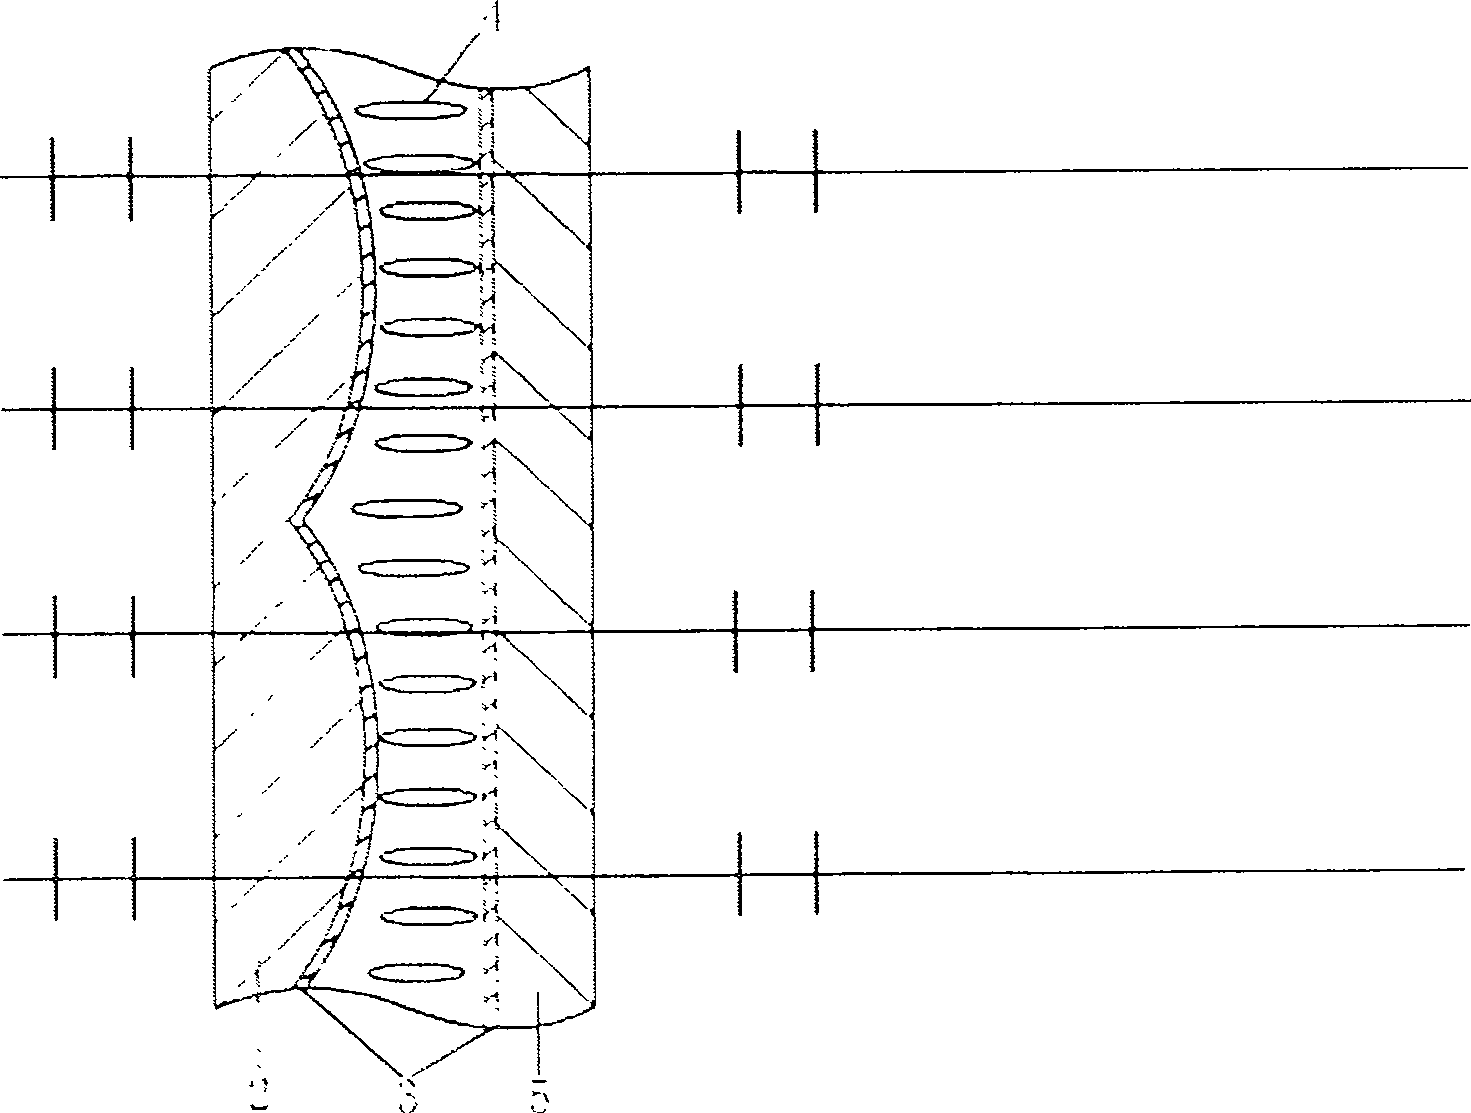 Stereo display device